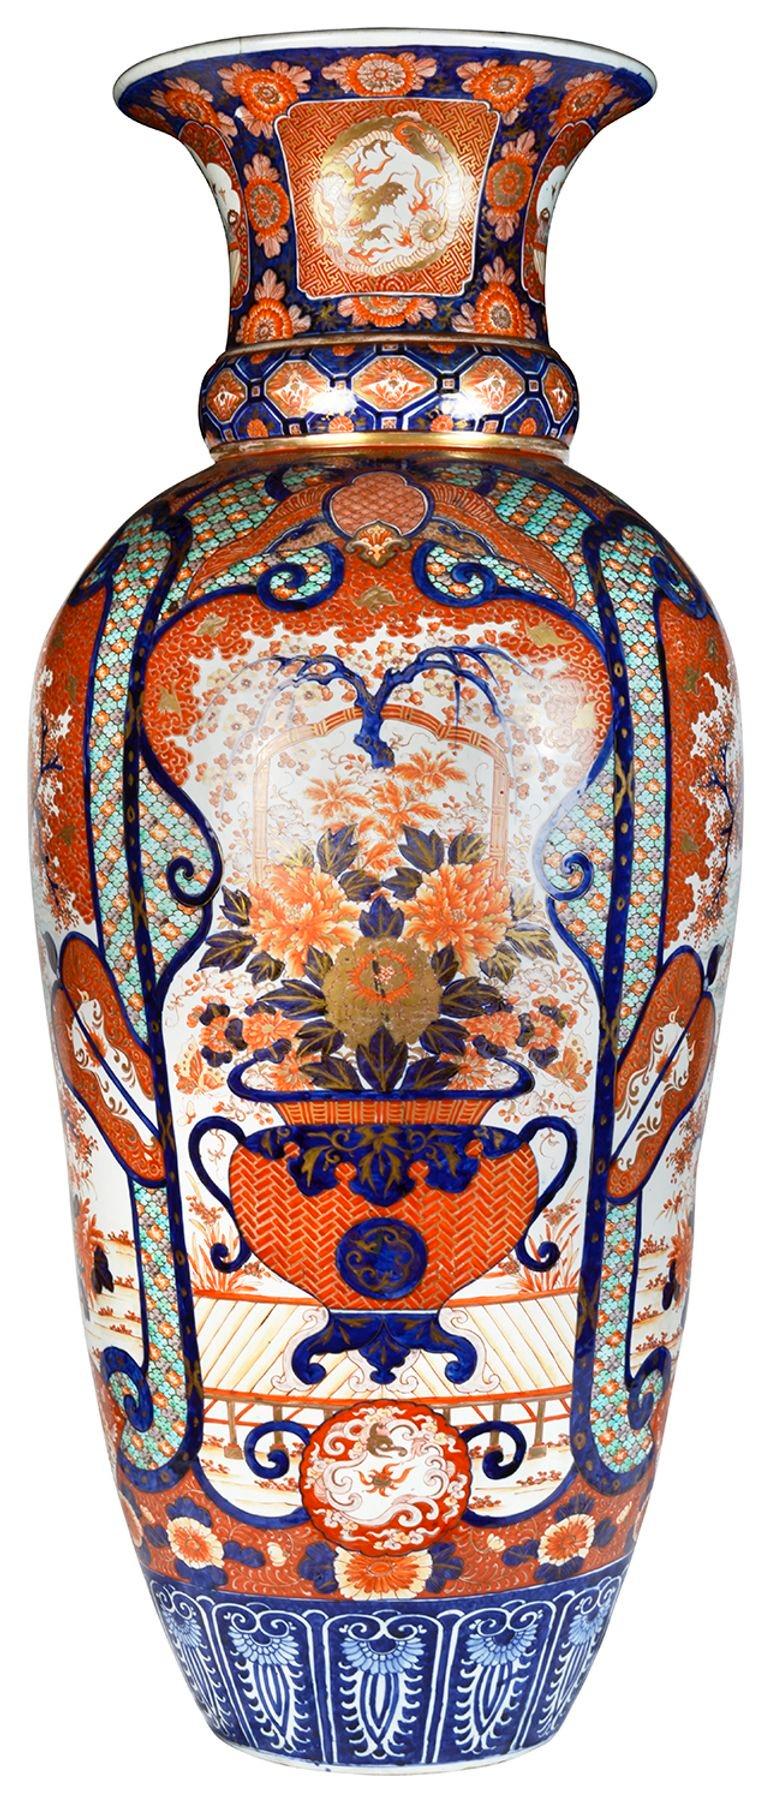 A spectacular late 19th century Japanese Imari vase, having wonderful bold blue and orange ground, classical motif decoration to the boarders, inset hand painted panels depicting exotic birds, flowers, blossom trees and a large vase with